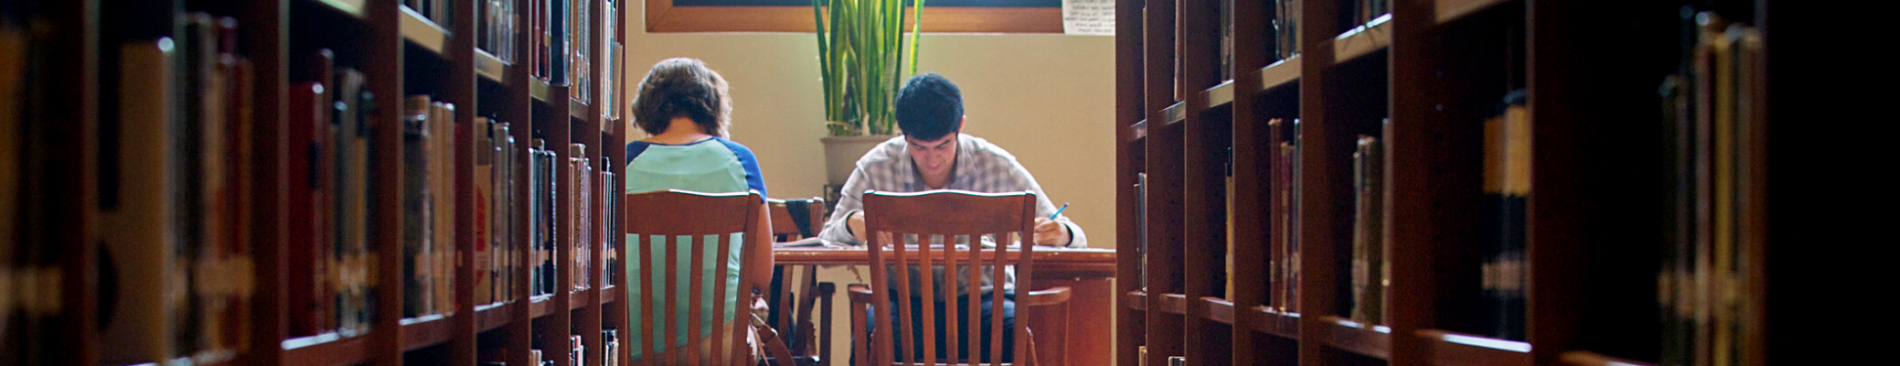 Students studying at table in library